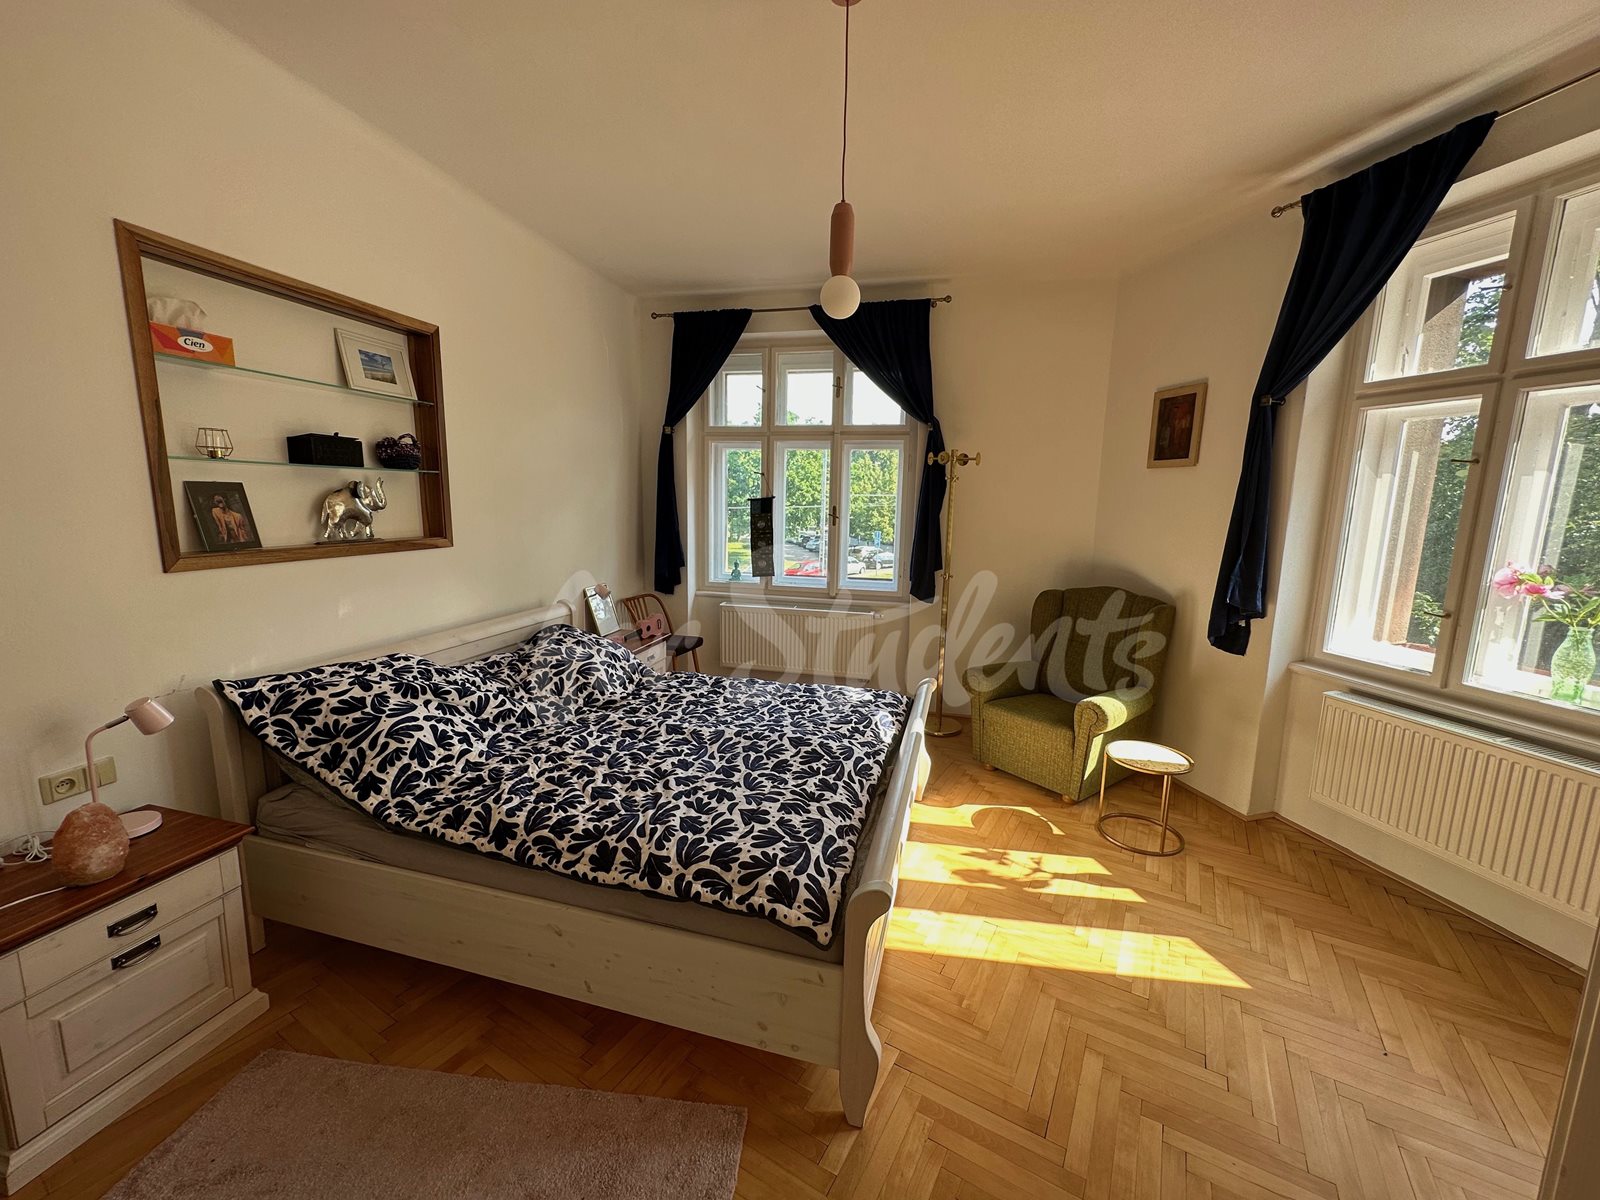 Newly reconstructed one bedroom apartment right next to Faculty of Medicine, Hradec Králové